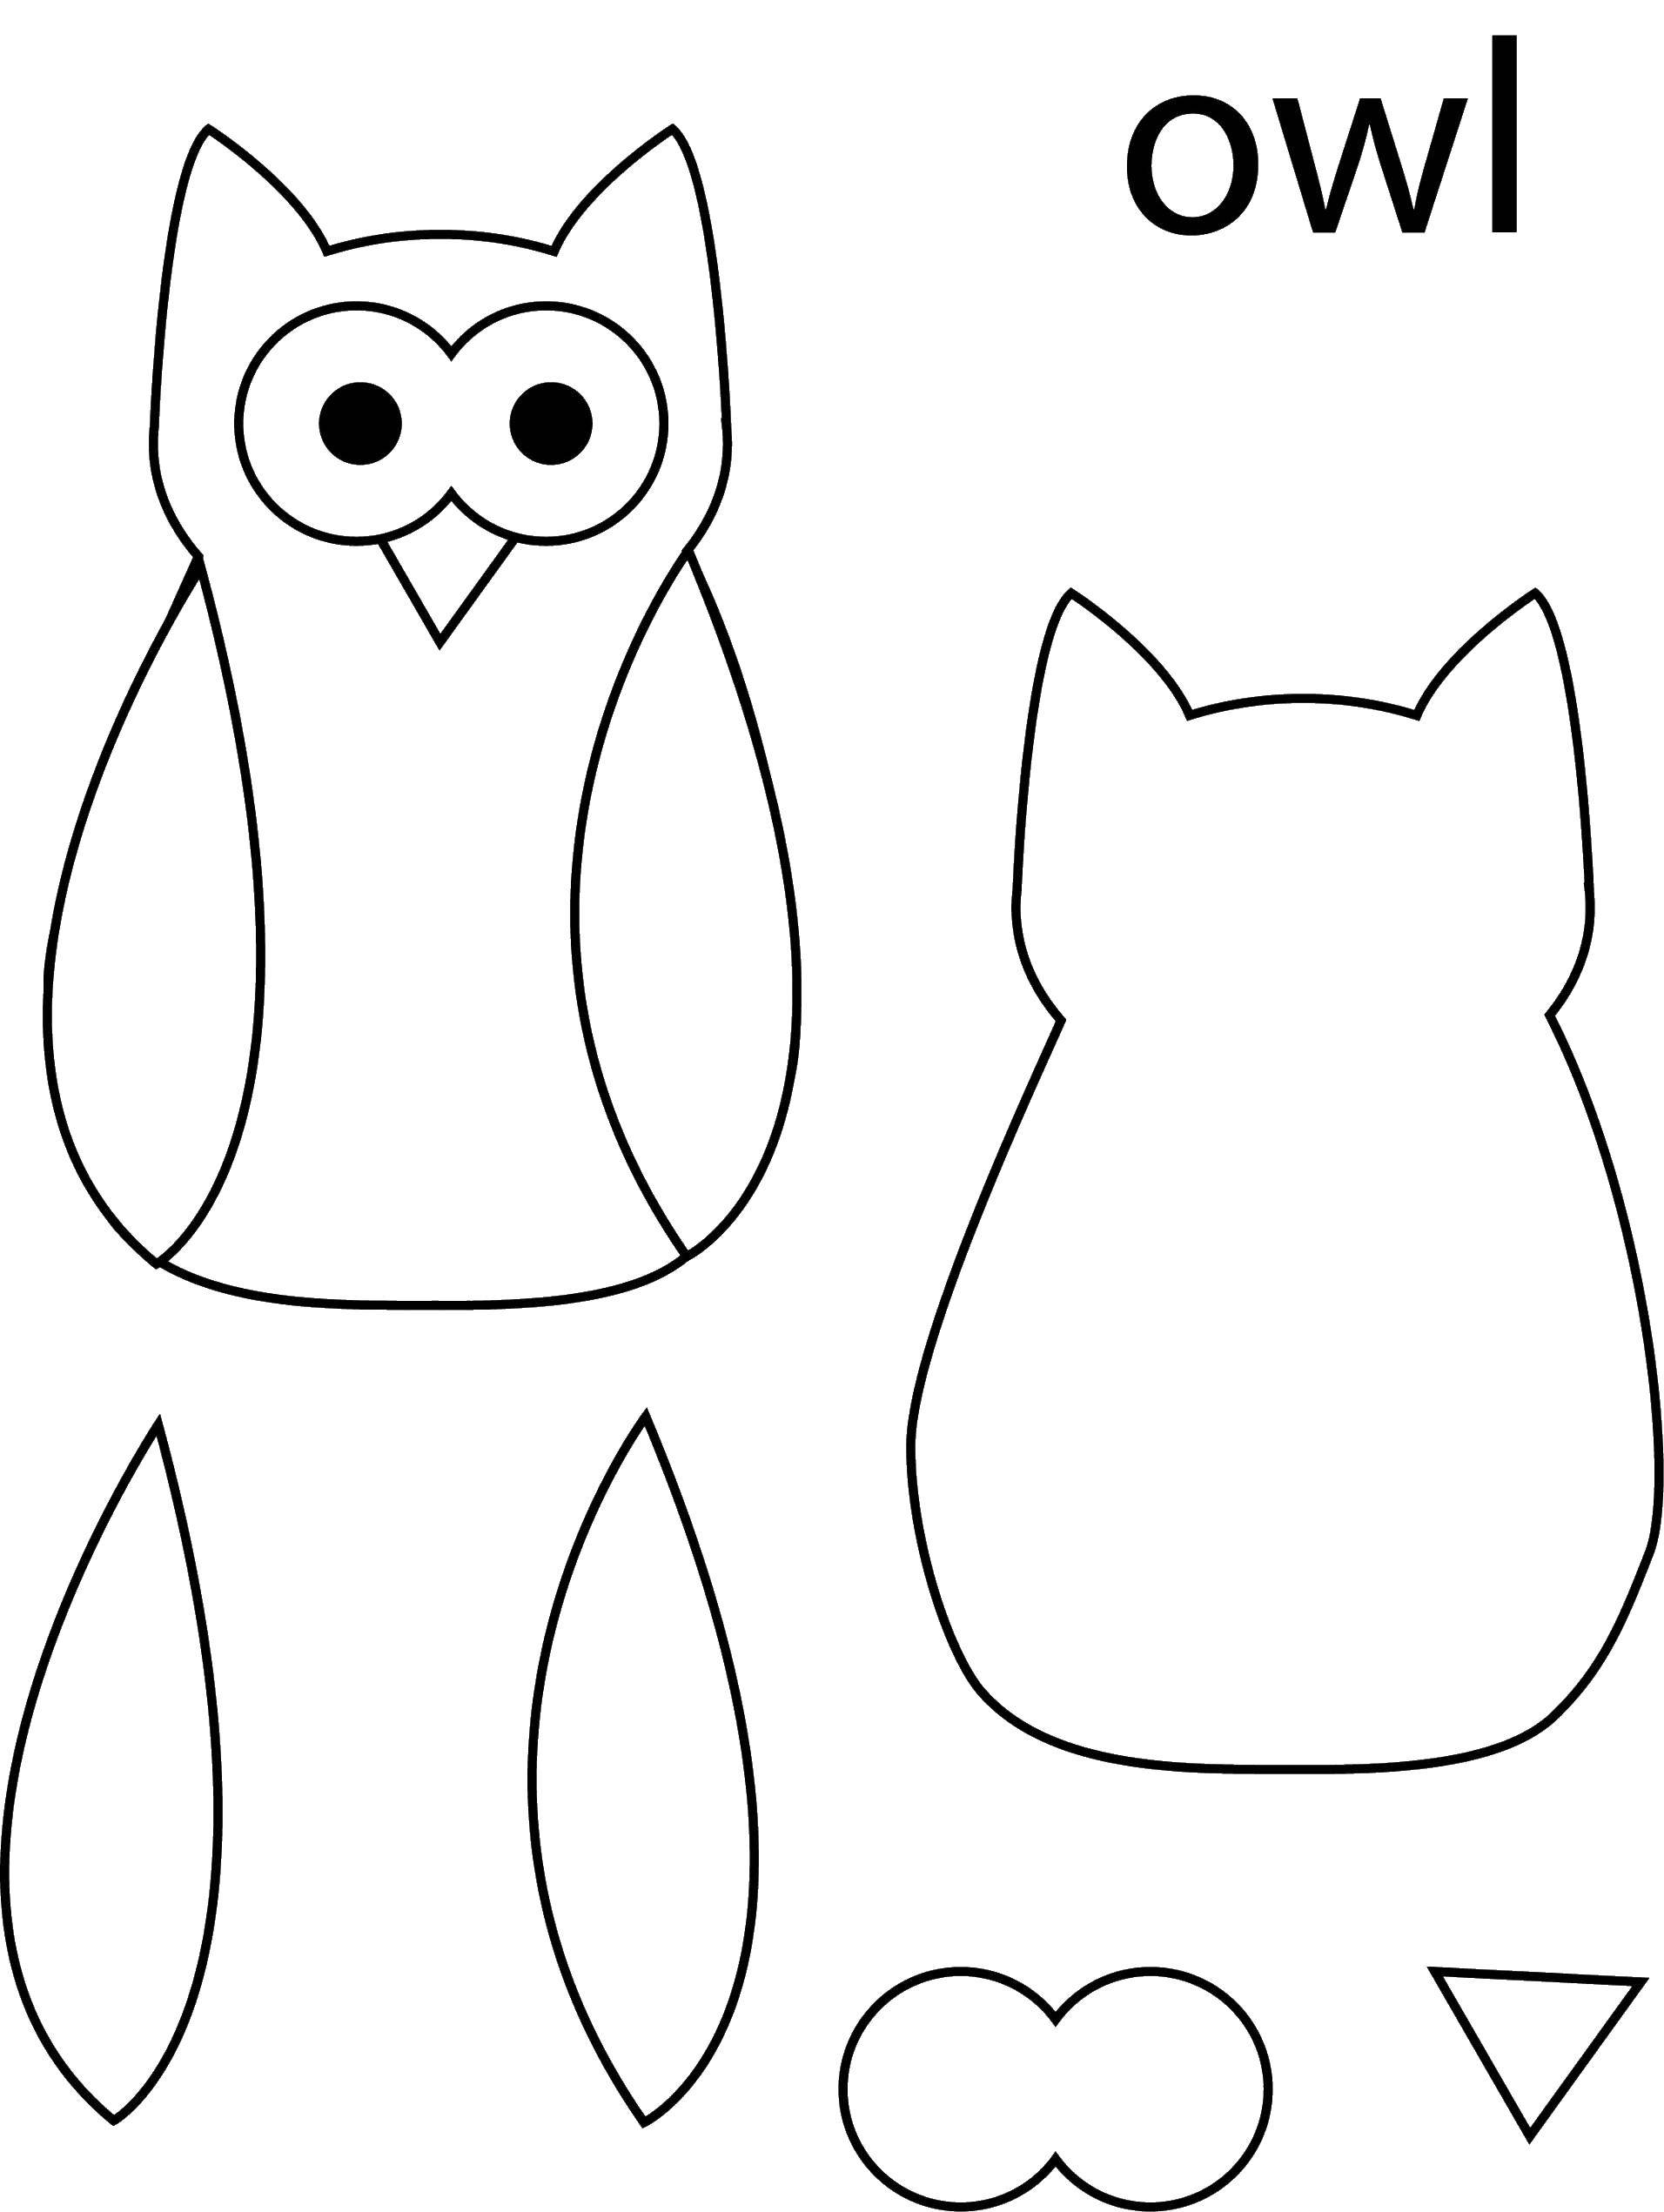 Coloring Owls pattern for cutting out. Category The contours for cutting out the birds. Tags:  template, outline, owl, eyes.